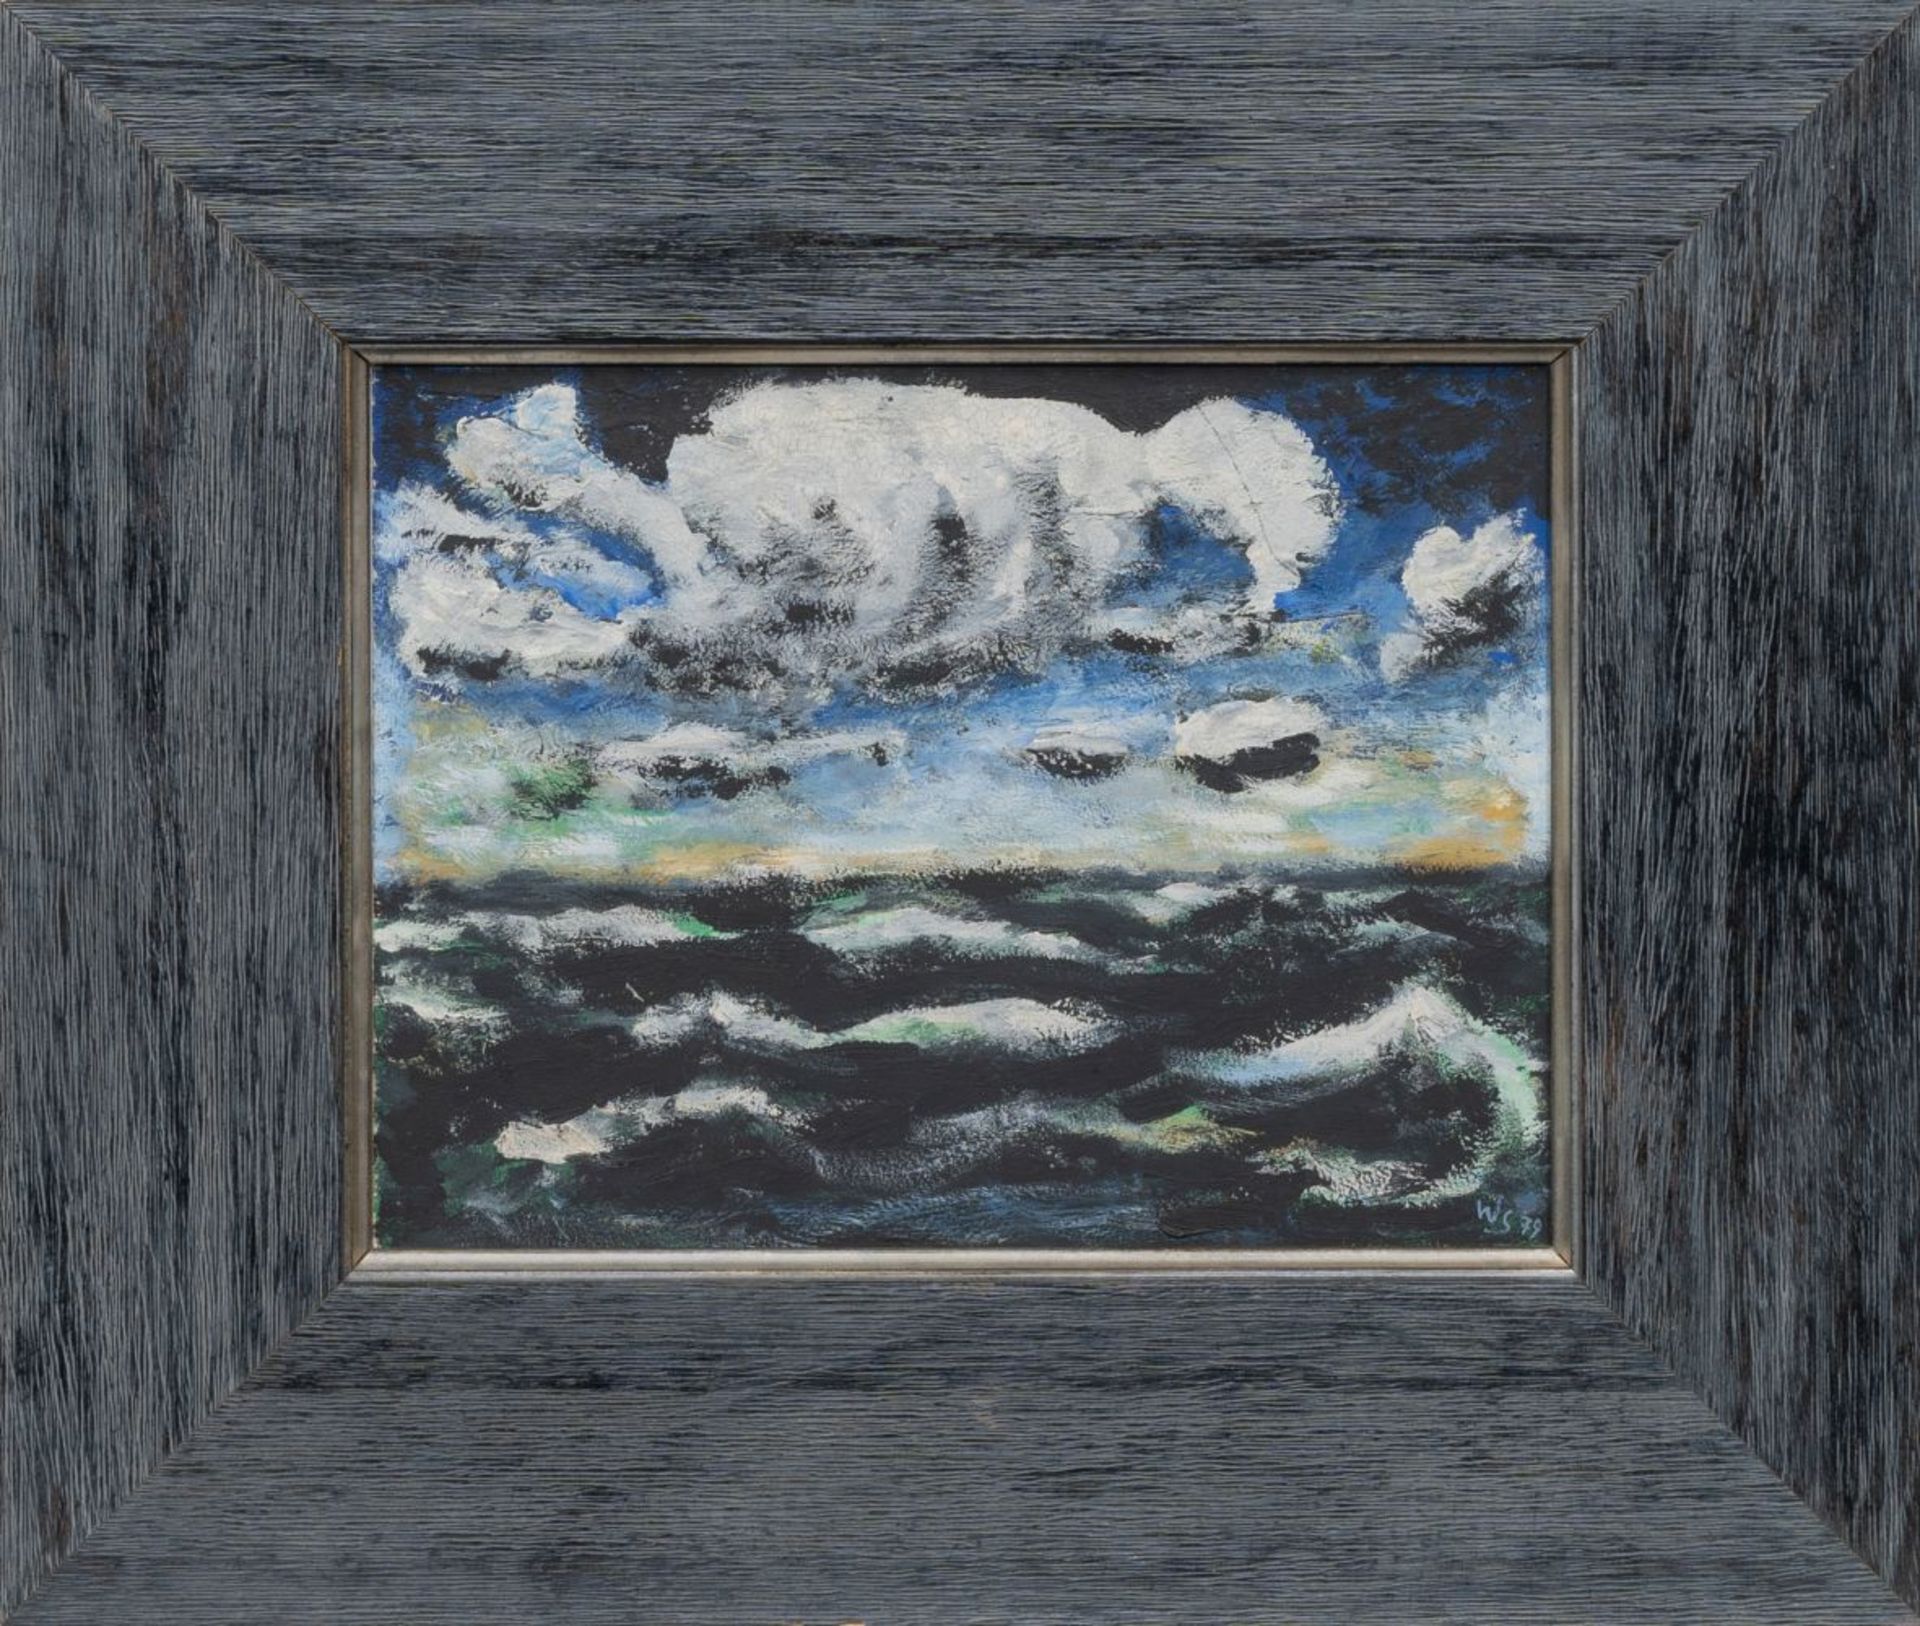 Scholz, Werner (Berlin 1898 - Alpbach/Tirol 1982). Clouds and Waves. - Image 2 of 2